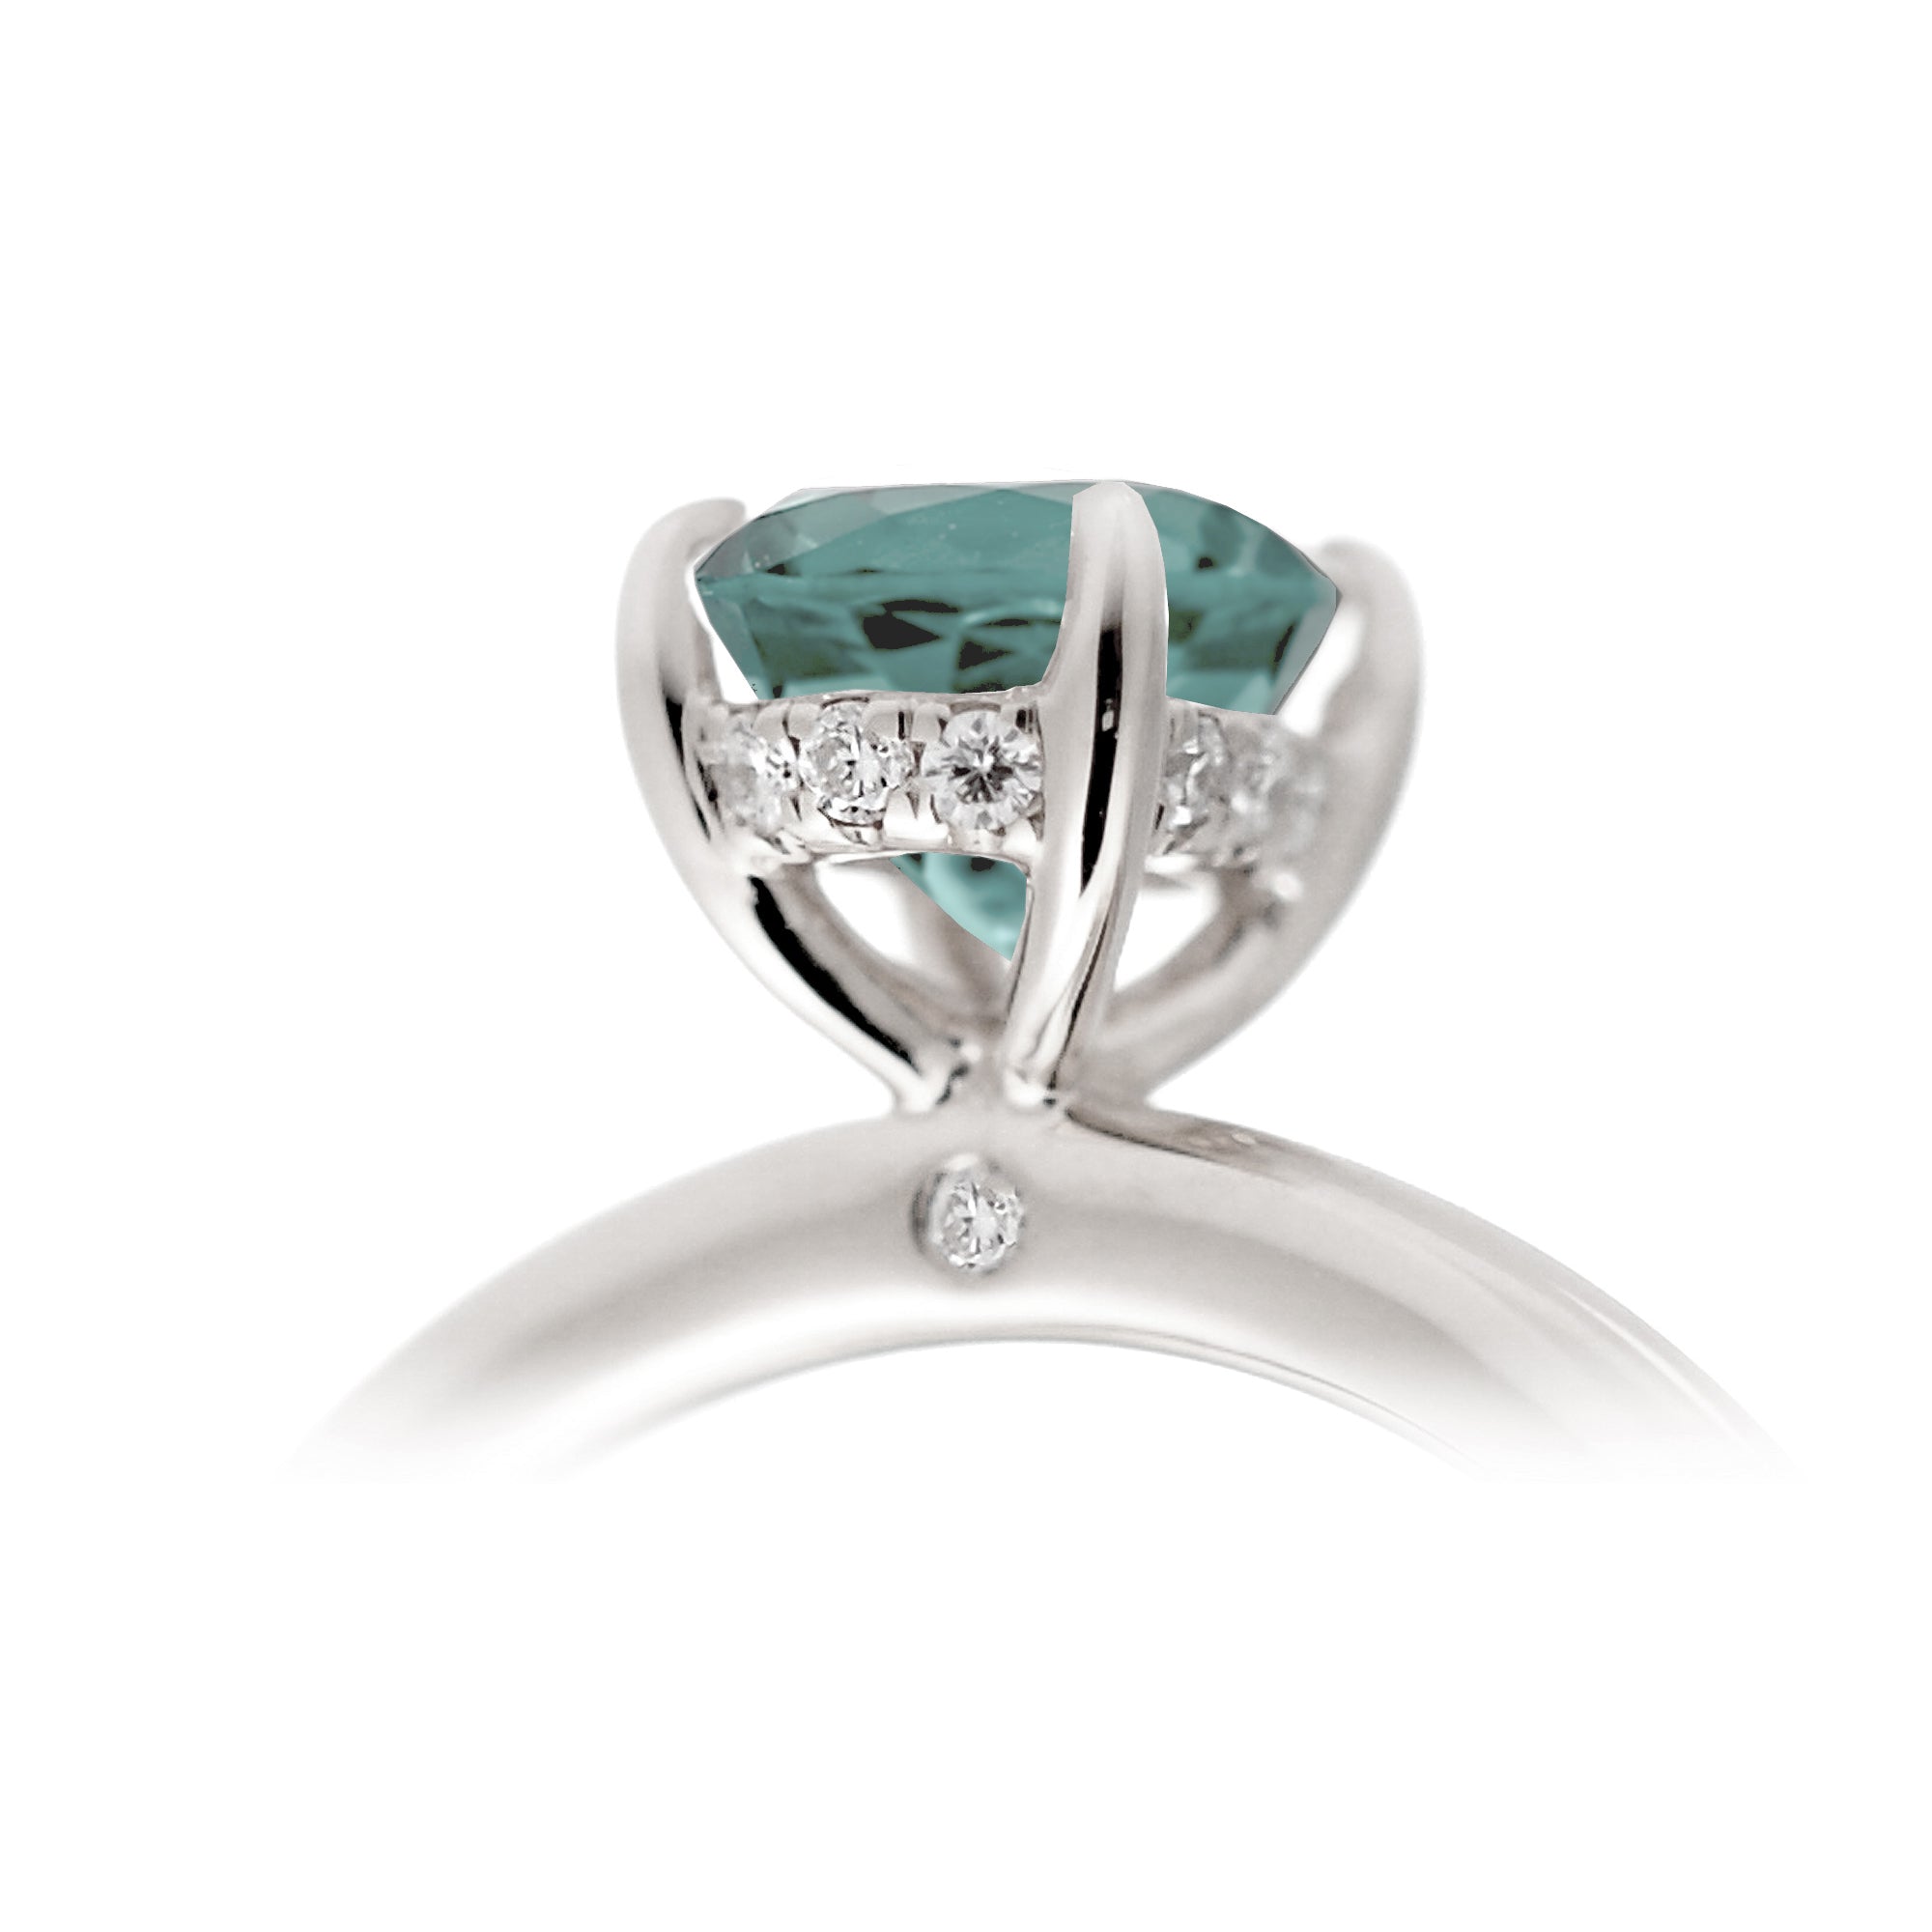 Princess cut lab green sapphire solitaire engagement ring in white gold